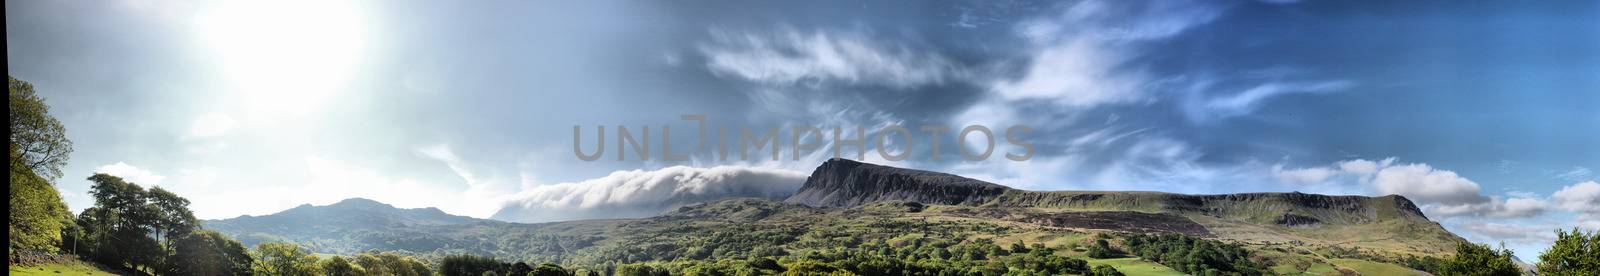 Stunning welsh mountains under a cloudy blue sky by chrisga